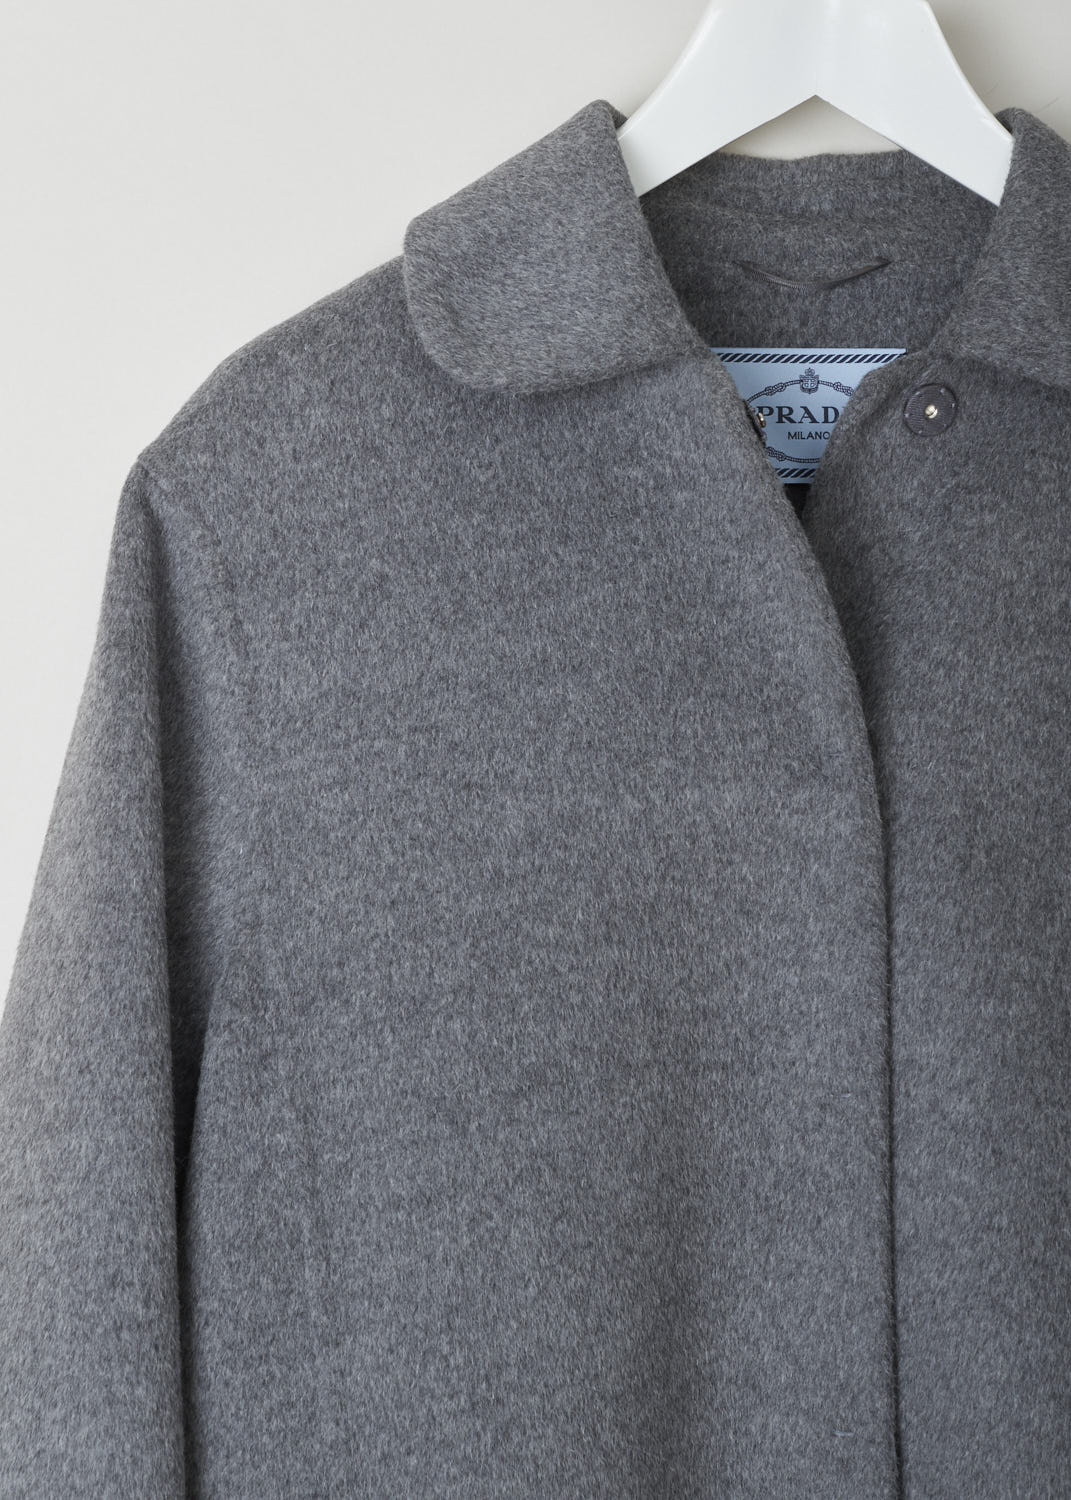 PRADA, GREY WOOL COAT WITH CLAUDINE COLLAR, P650E_03H_Cashgora_Double_F0031_Grigio, Grey, Detail, This grey wool-blend coat has a Claudine collar and a concealed press-button closure. Concealed slanted pockets can also be found on the front of the coat. In the back, the coat has a pleated yoke and a martingale.
